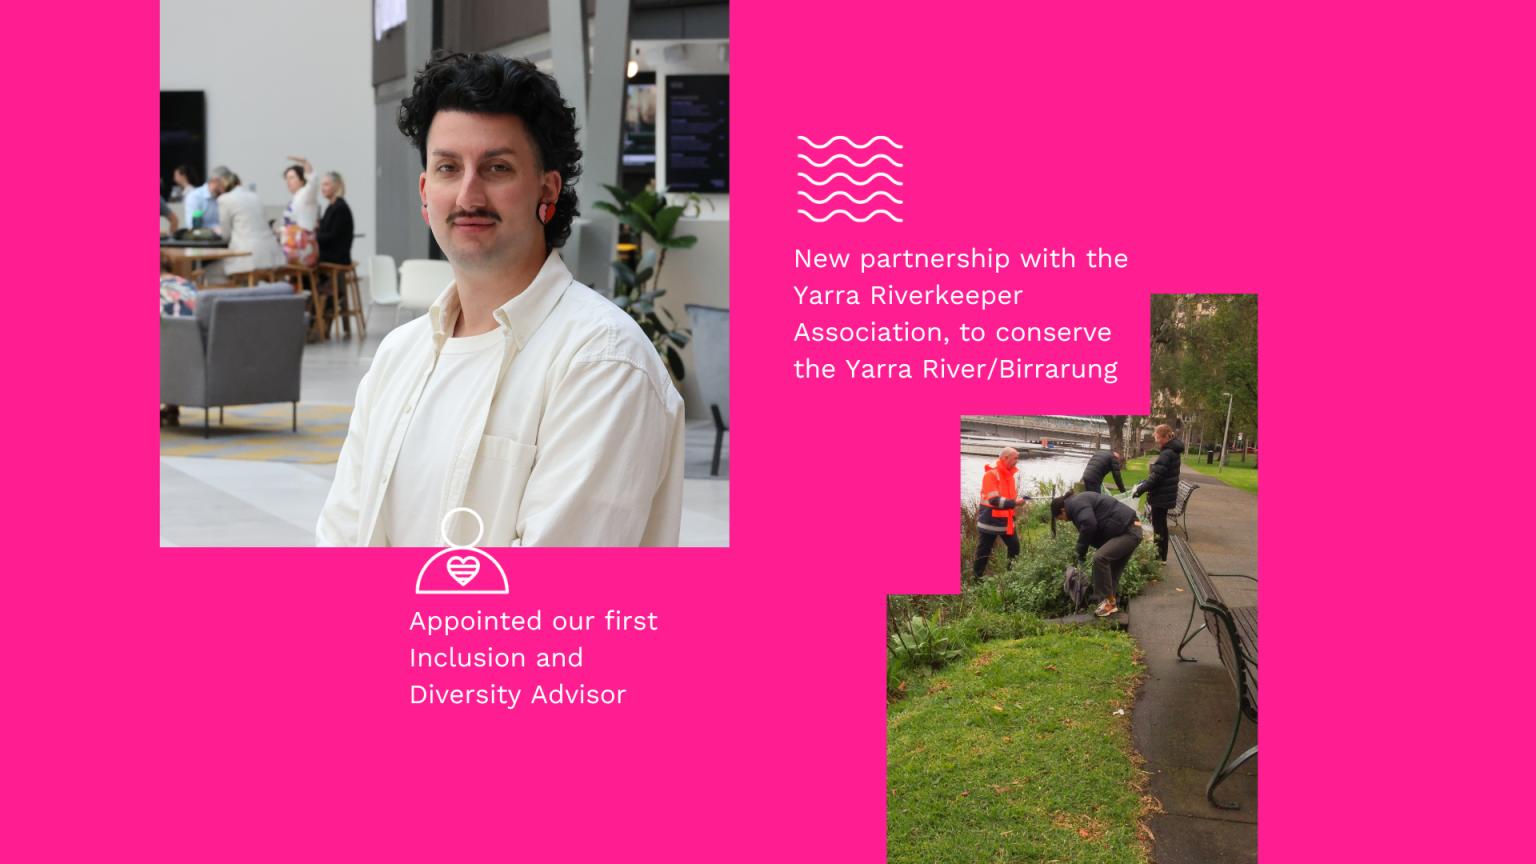 New partnership with the Yarra Riverkeeper Association, to conserve the Yarra River/Birrarung. Appointed our first Inclusion and Diversity Advisor.